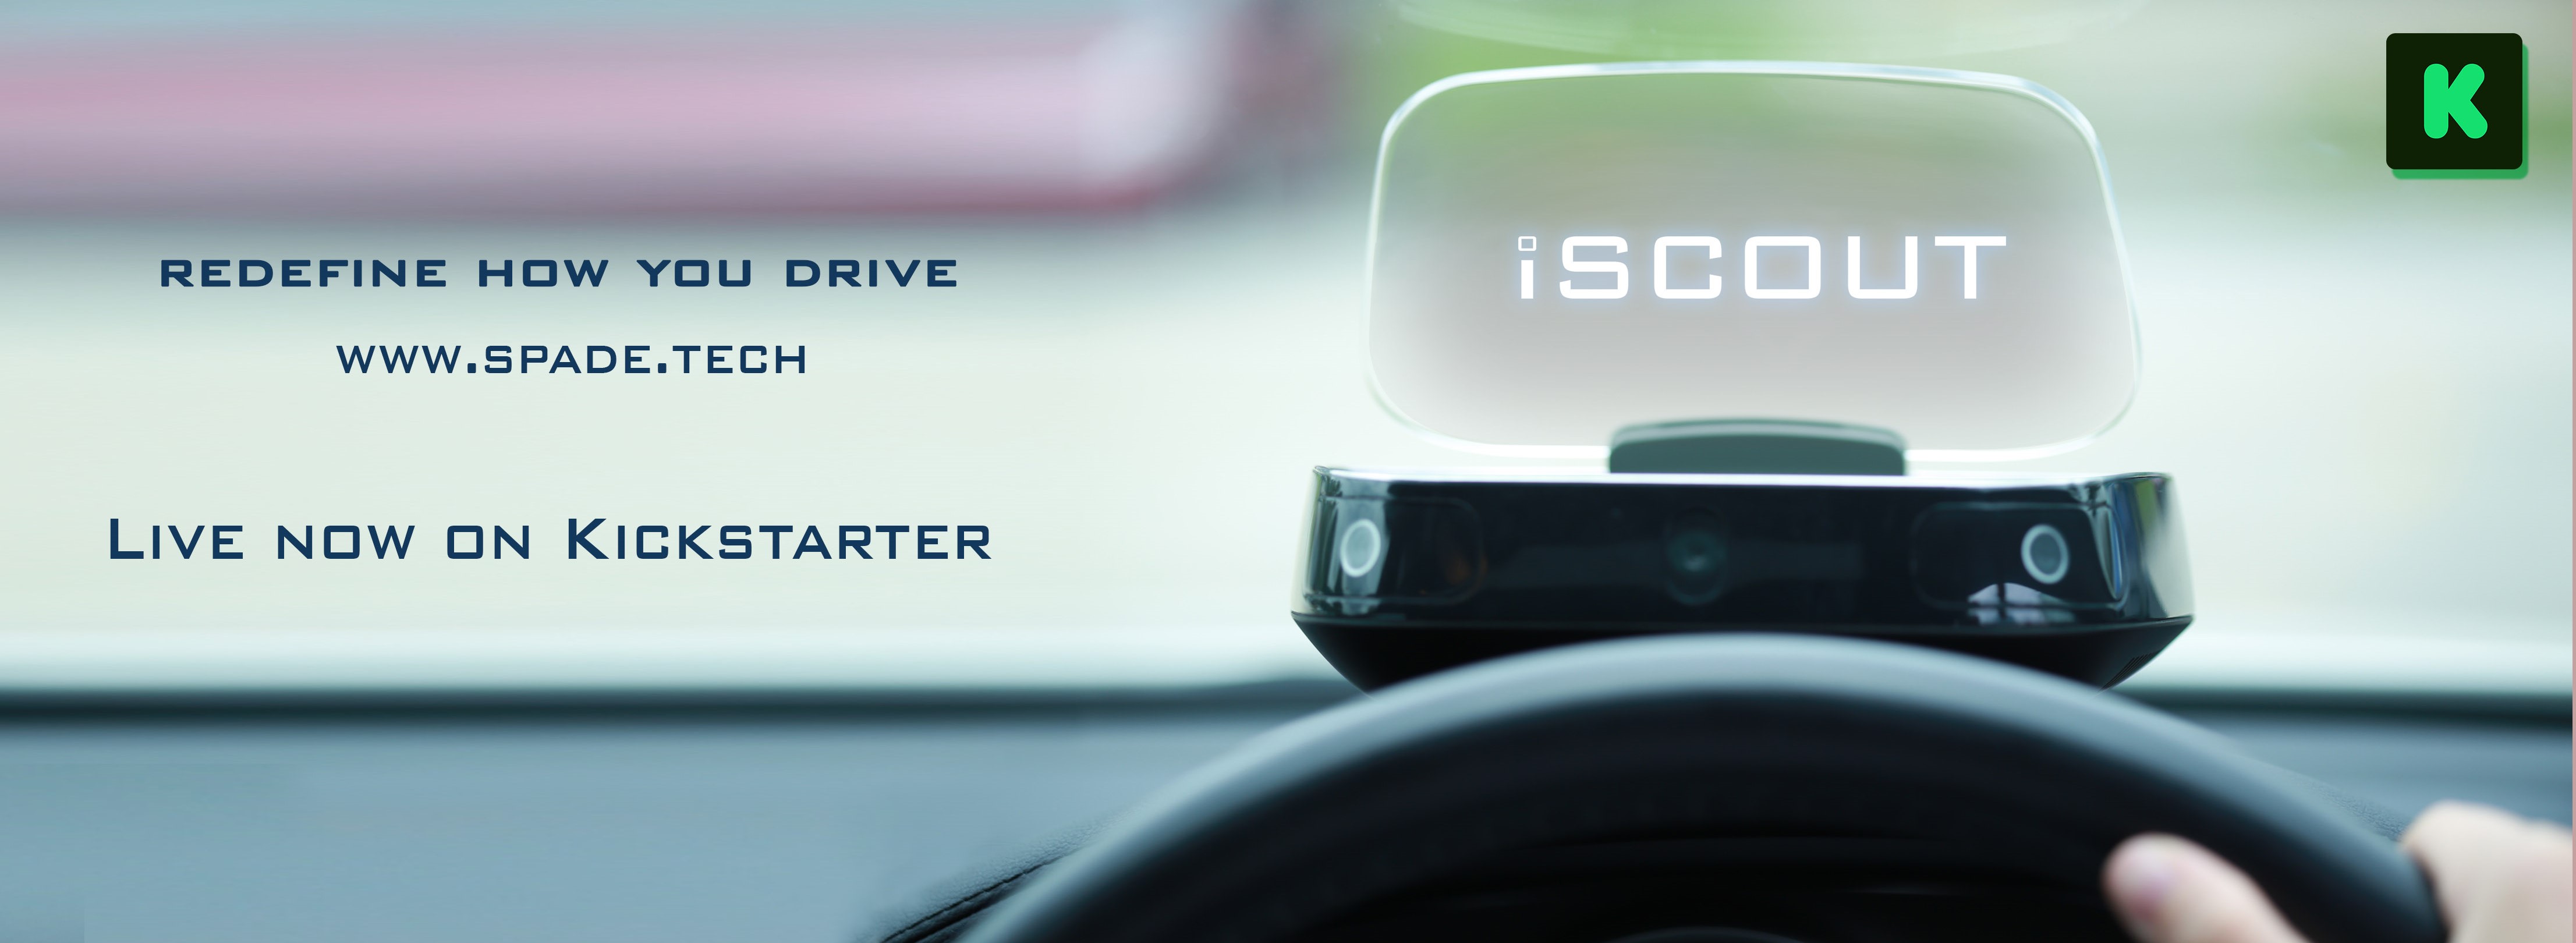 iSCOUT Head-Up Display